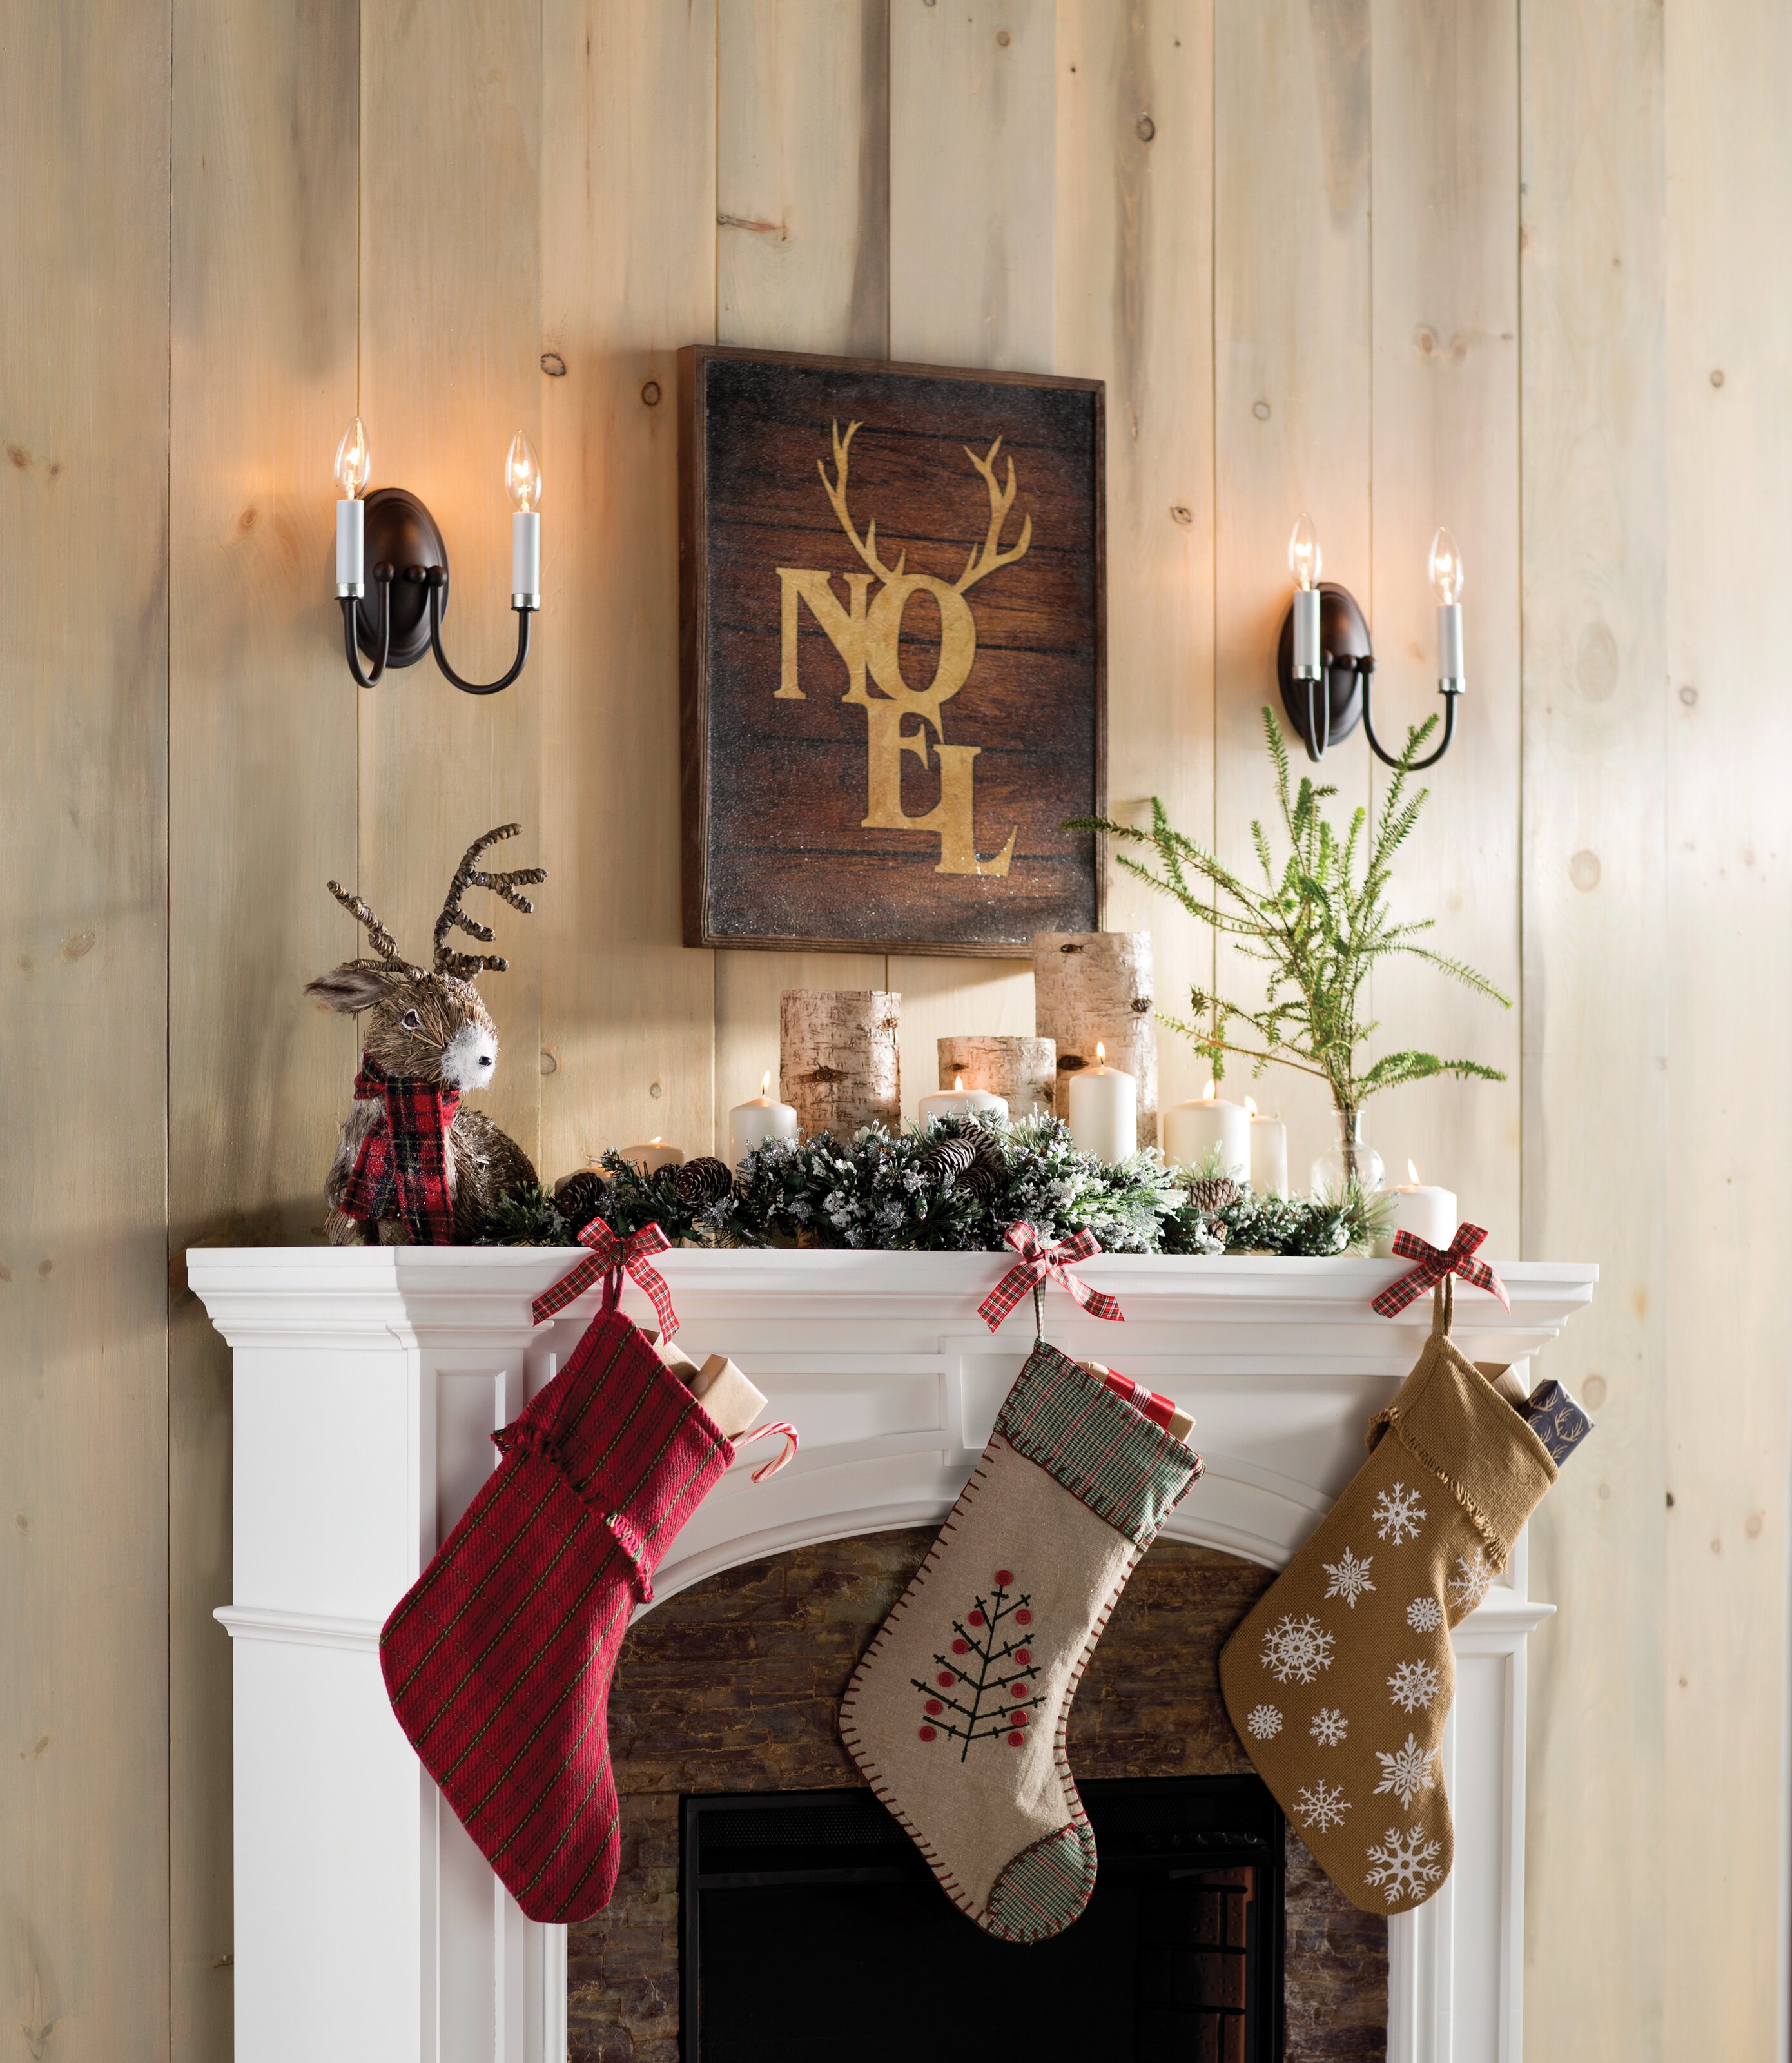 How To Save Time & Money By Repurposing Your Holiday Decor with natural birch hurricane candle holders for your fireplace mantel mixed with white candles, greenery and Christmas stockings